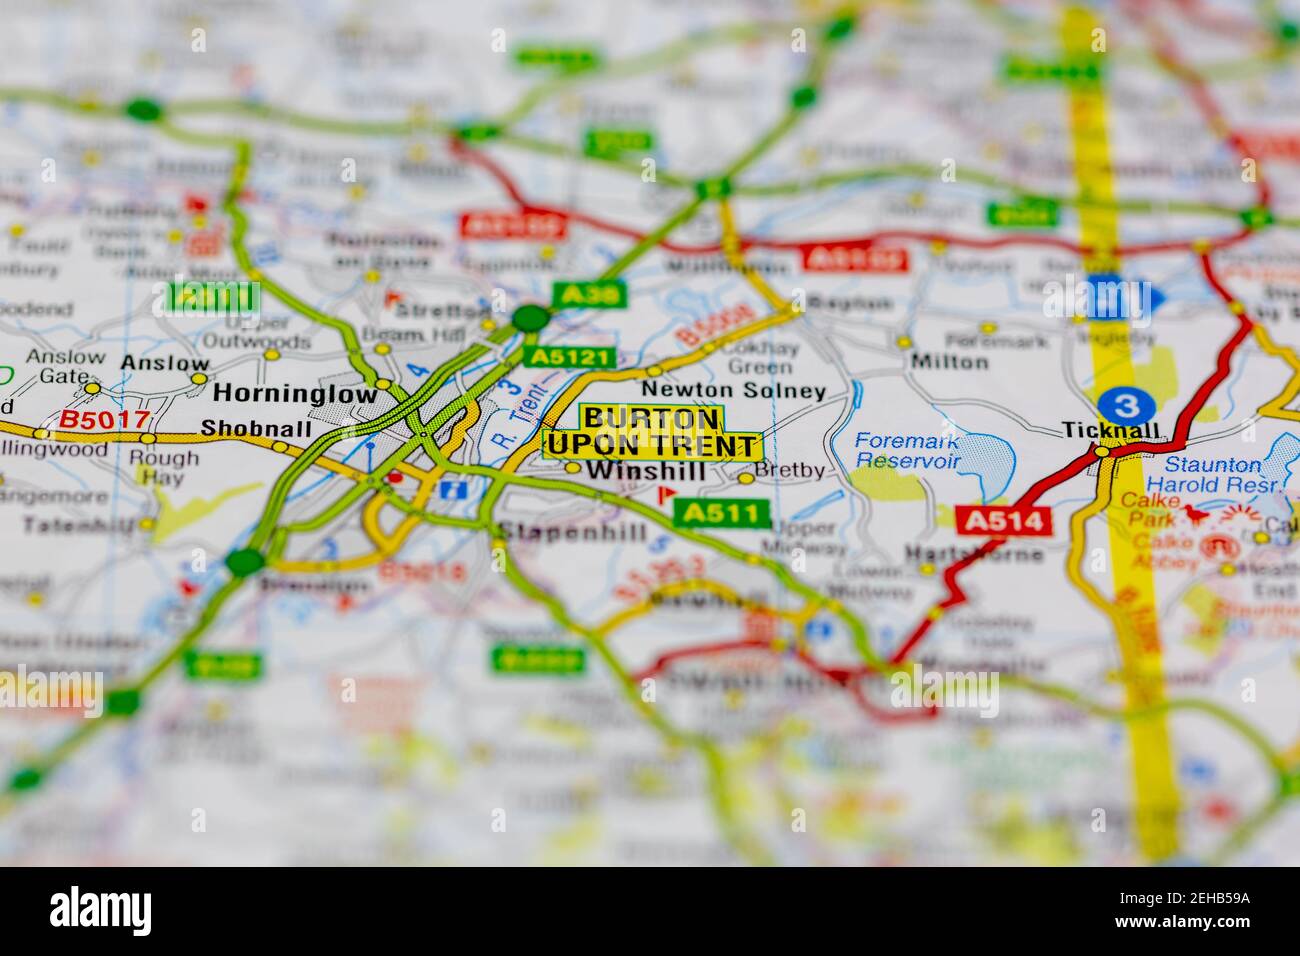 Burton upon trent and surrounding areas shown on a road map or Geography map Stock Photo